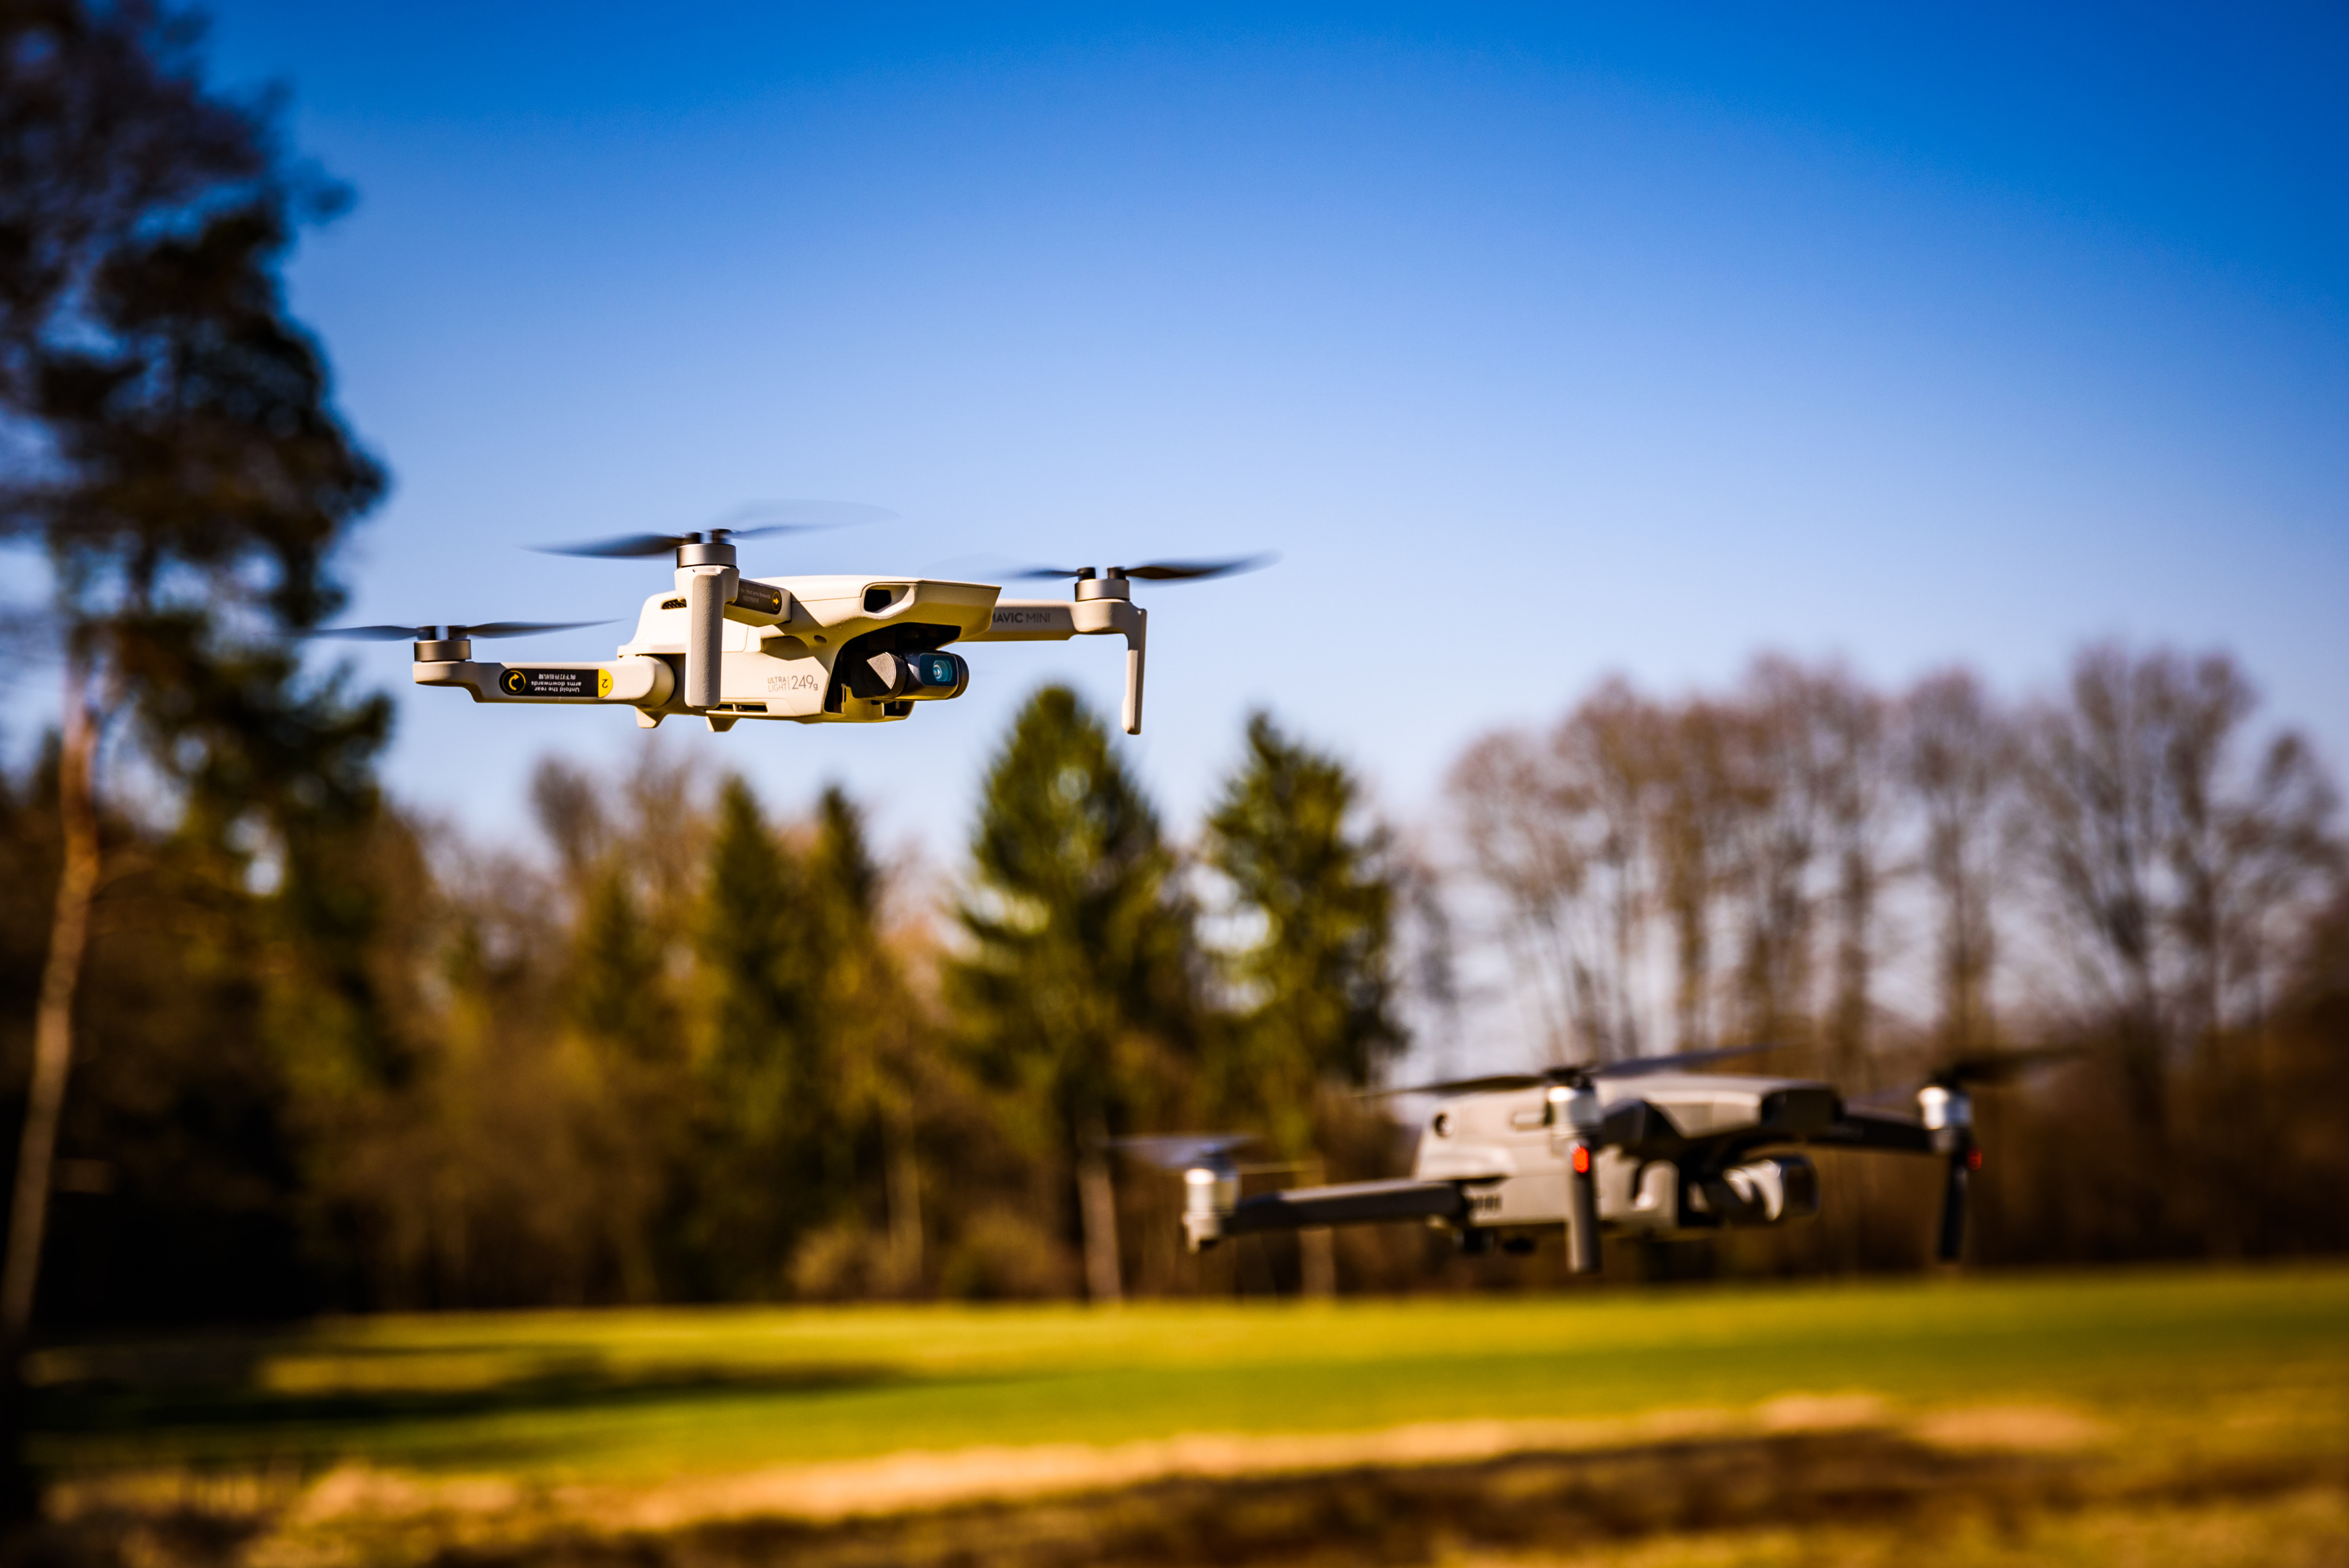 Chinese drones and other technology have been worrying the Australian government. Photo: Shutterstock